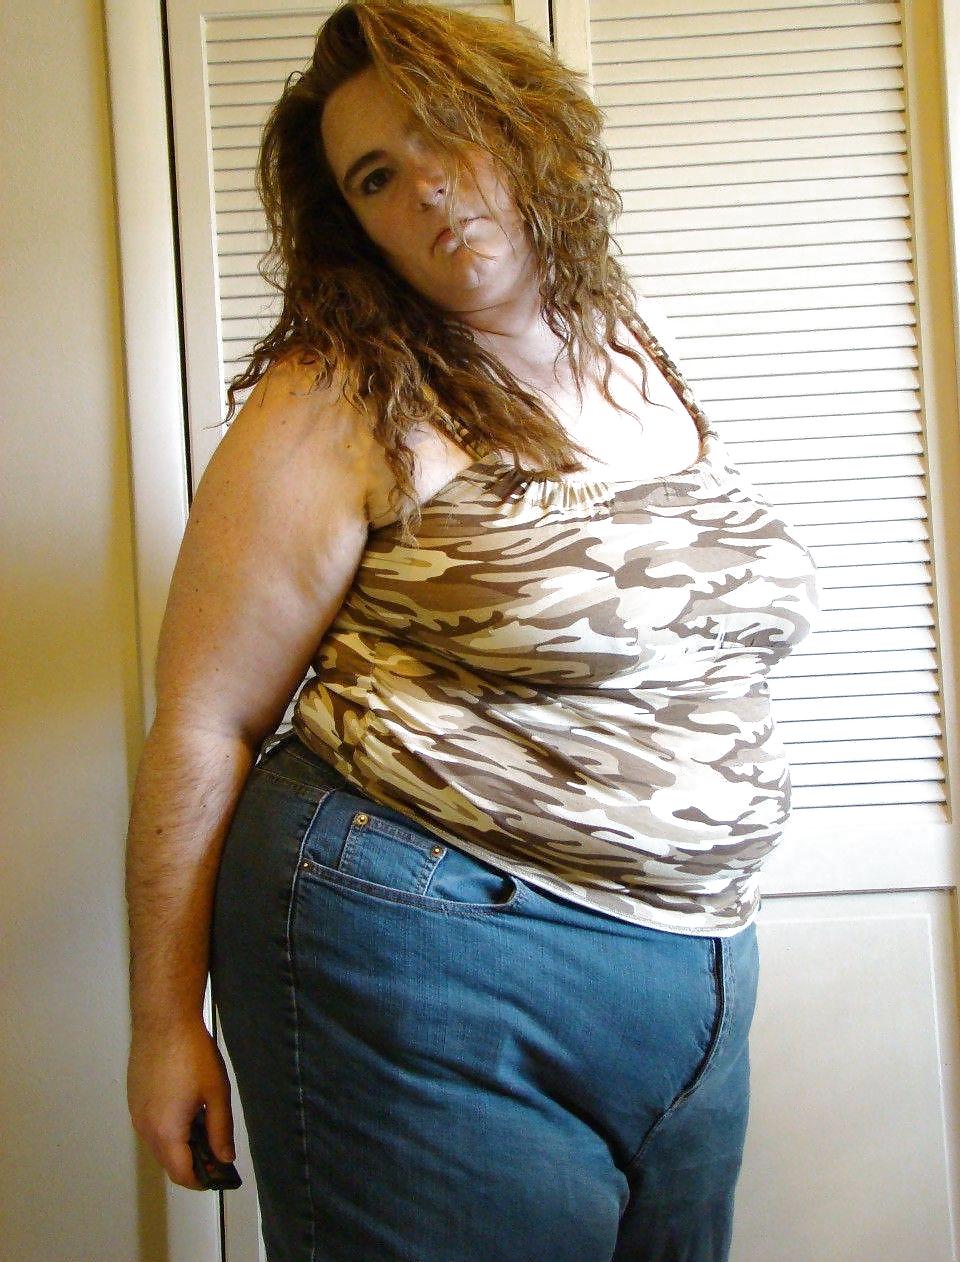 BBW in Tight Jeans! Collection #3 #22173973